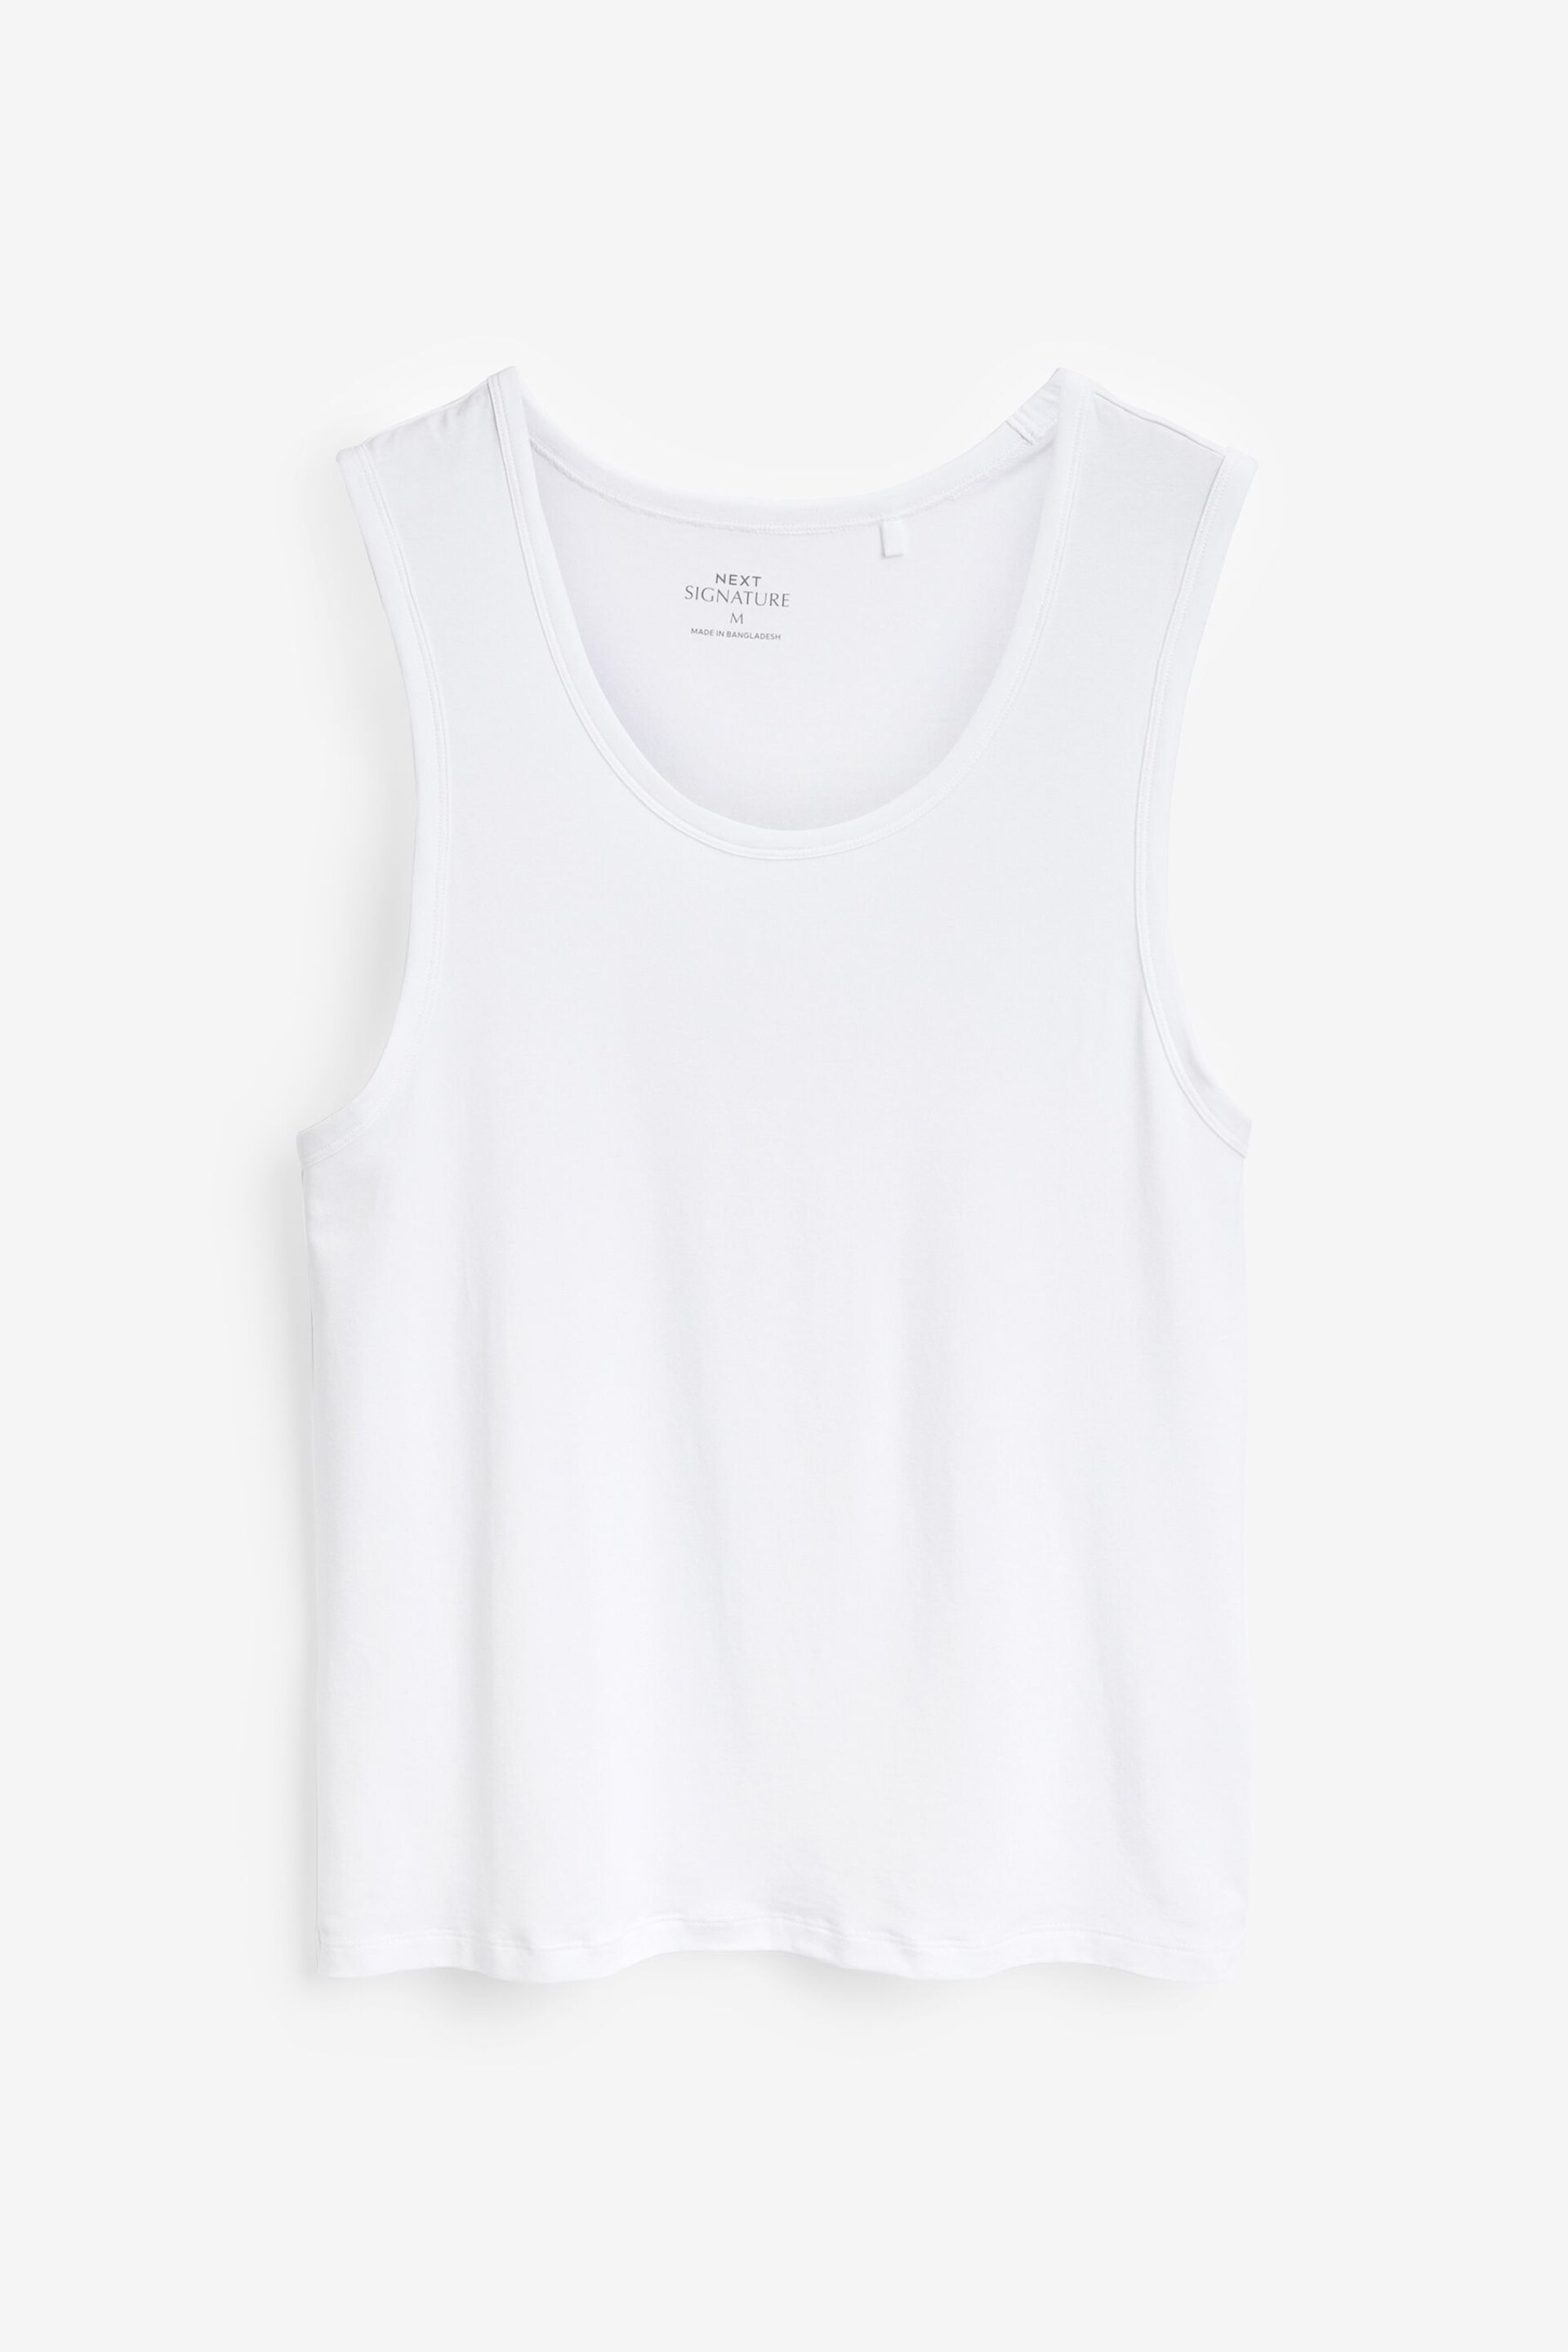 White 2 Pack Signature Bamboo Vests - Image 6 of 8